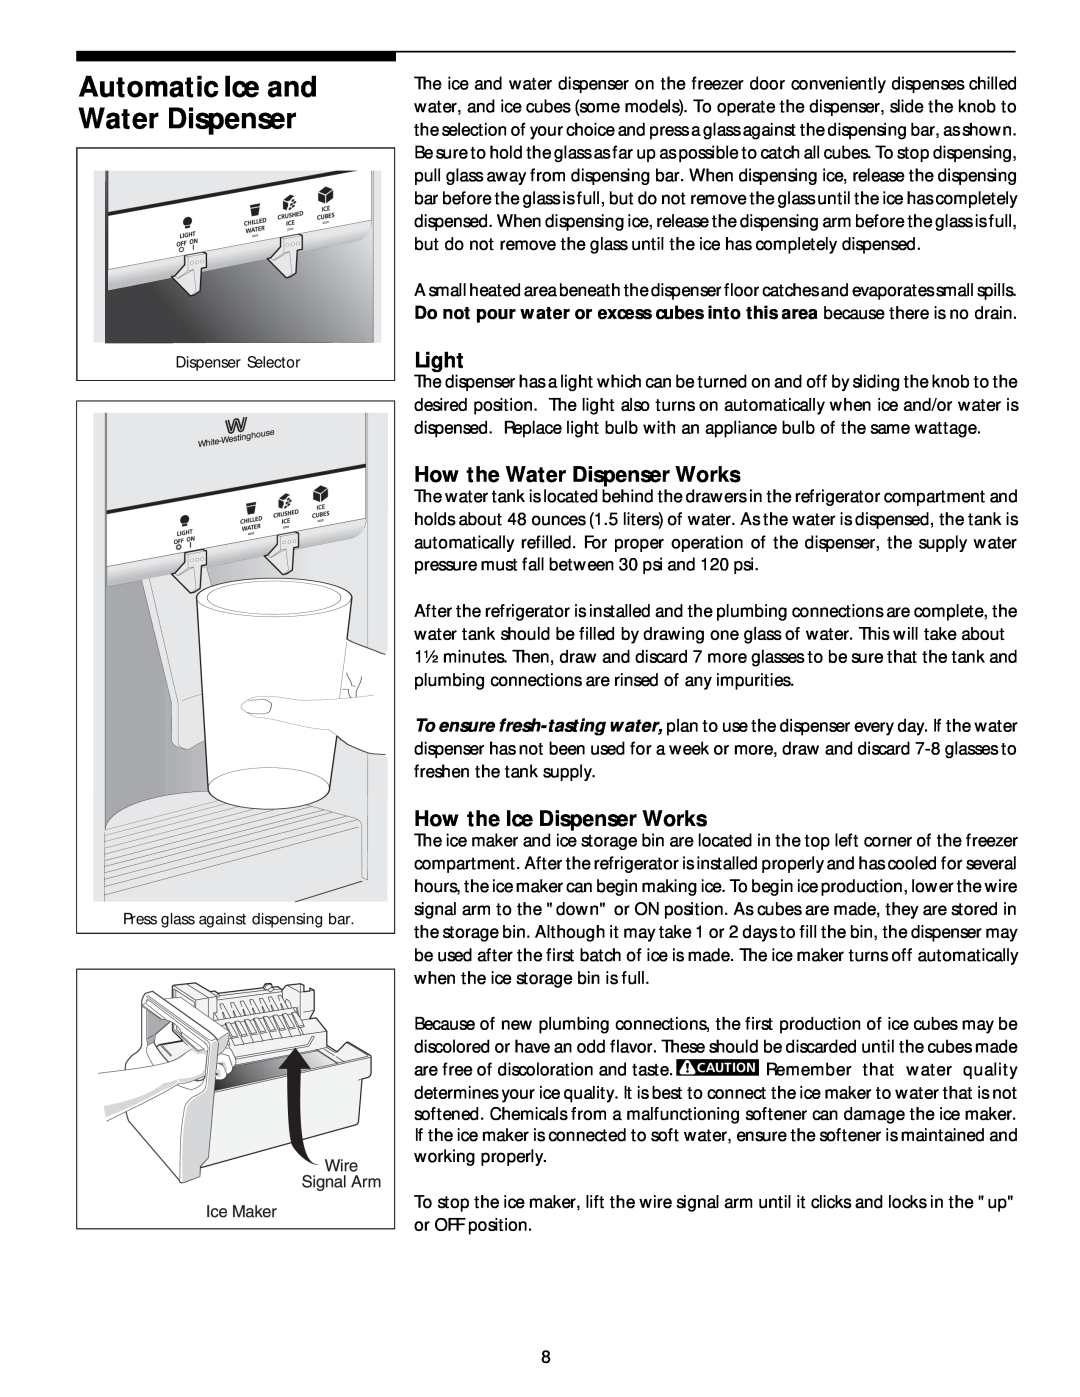 White-Westinghouse 218954301 manual Automatic Ice and Water Dispenser, Light, How the Water Dispenser Works 